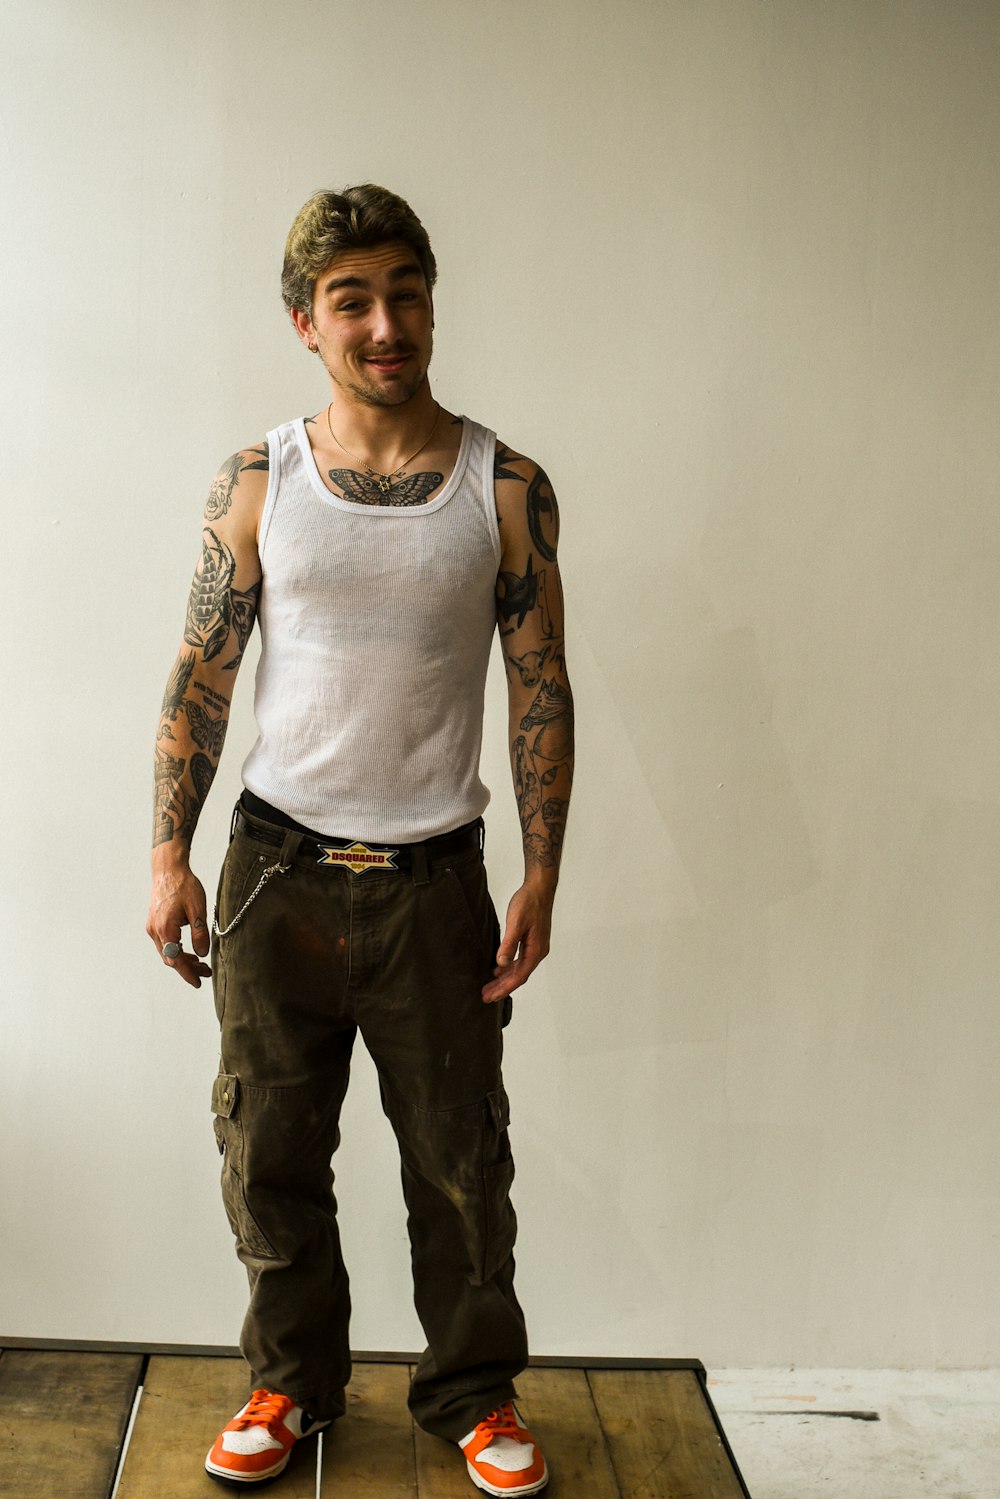 a man with tattoos standing on a wooden platform